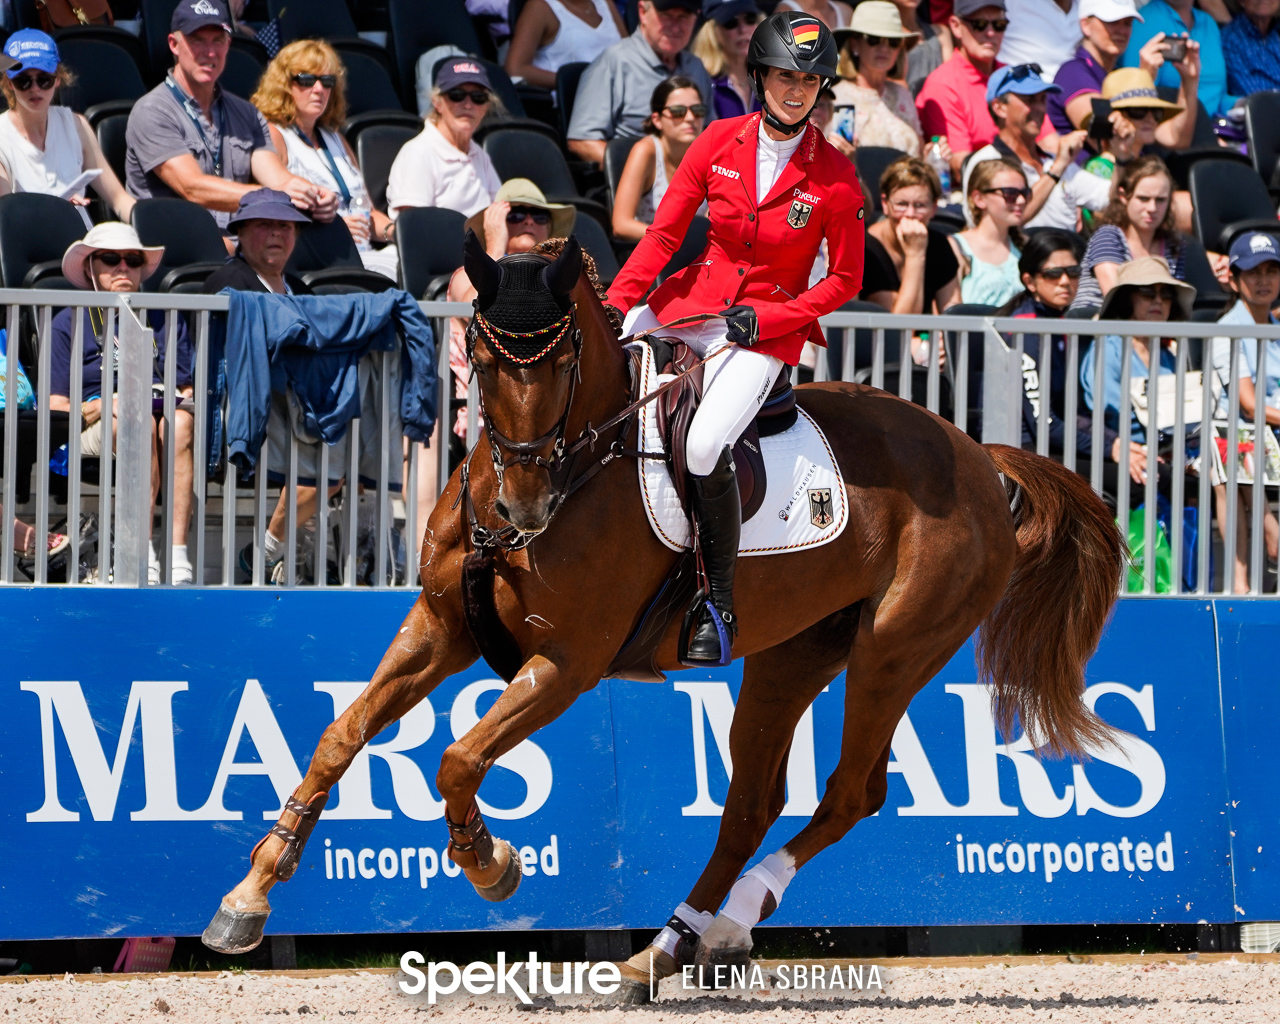 Earchphoto - Simone Blum enters the arena at the 2018 World Equestrian Games in Tryon NC